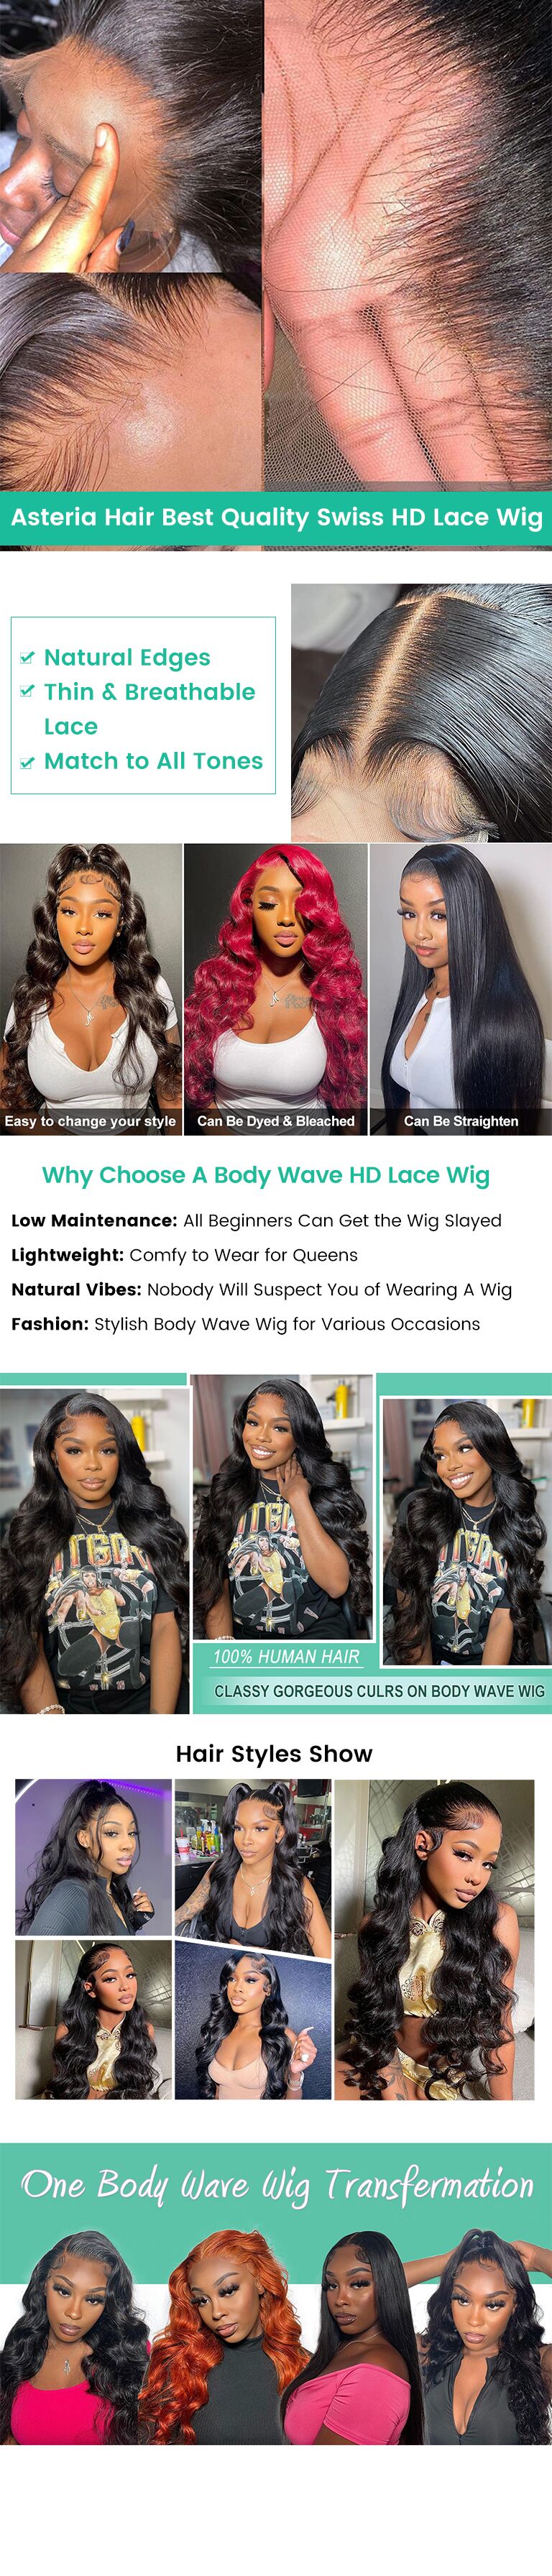 details about asteria hair body wave HD lace front wig